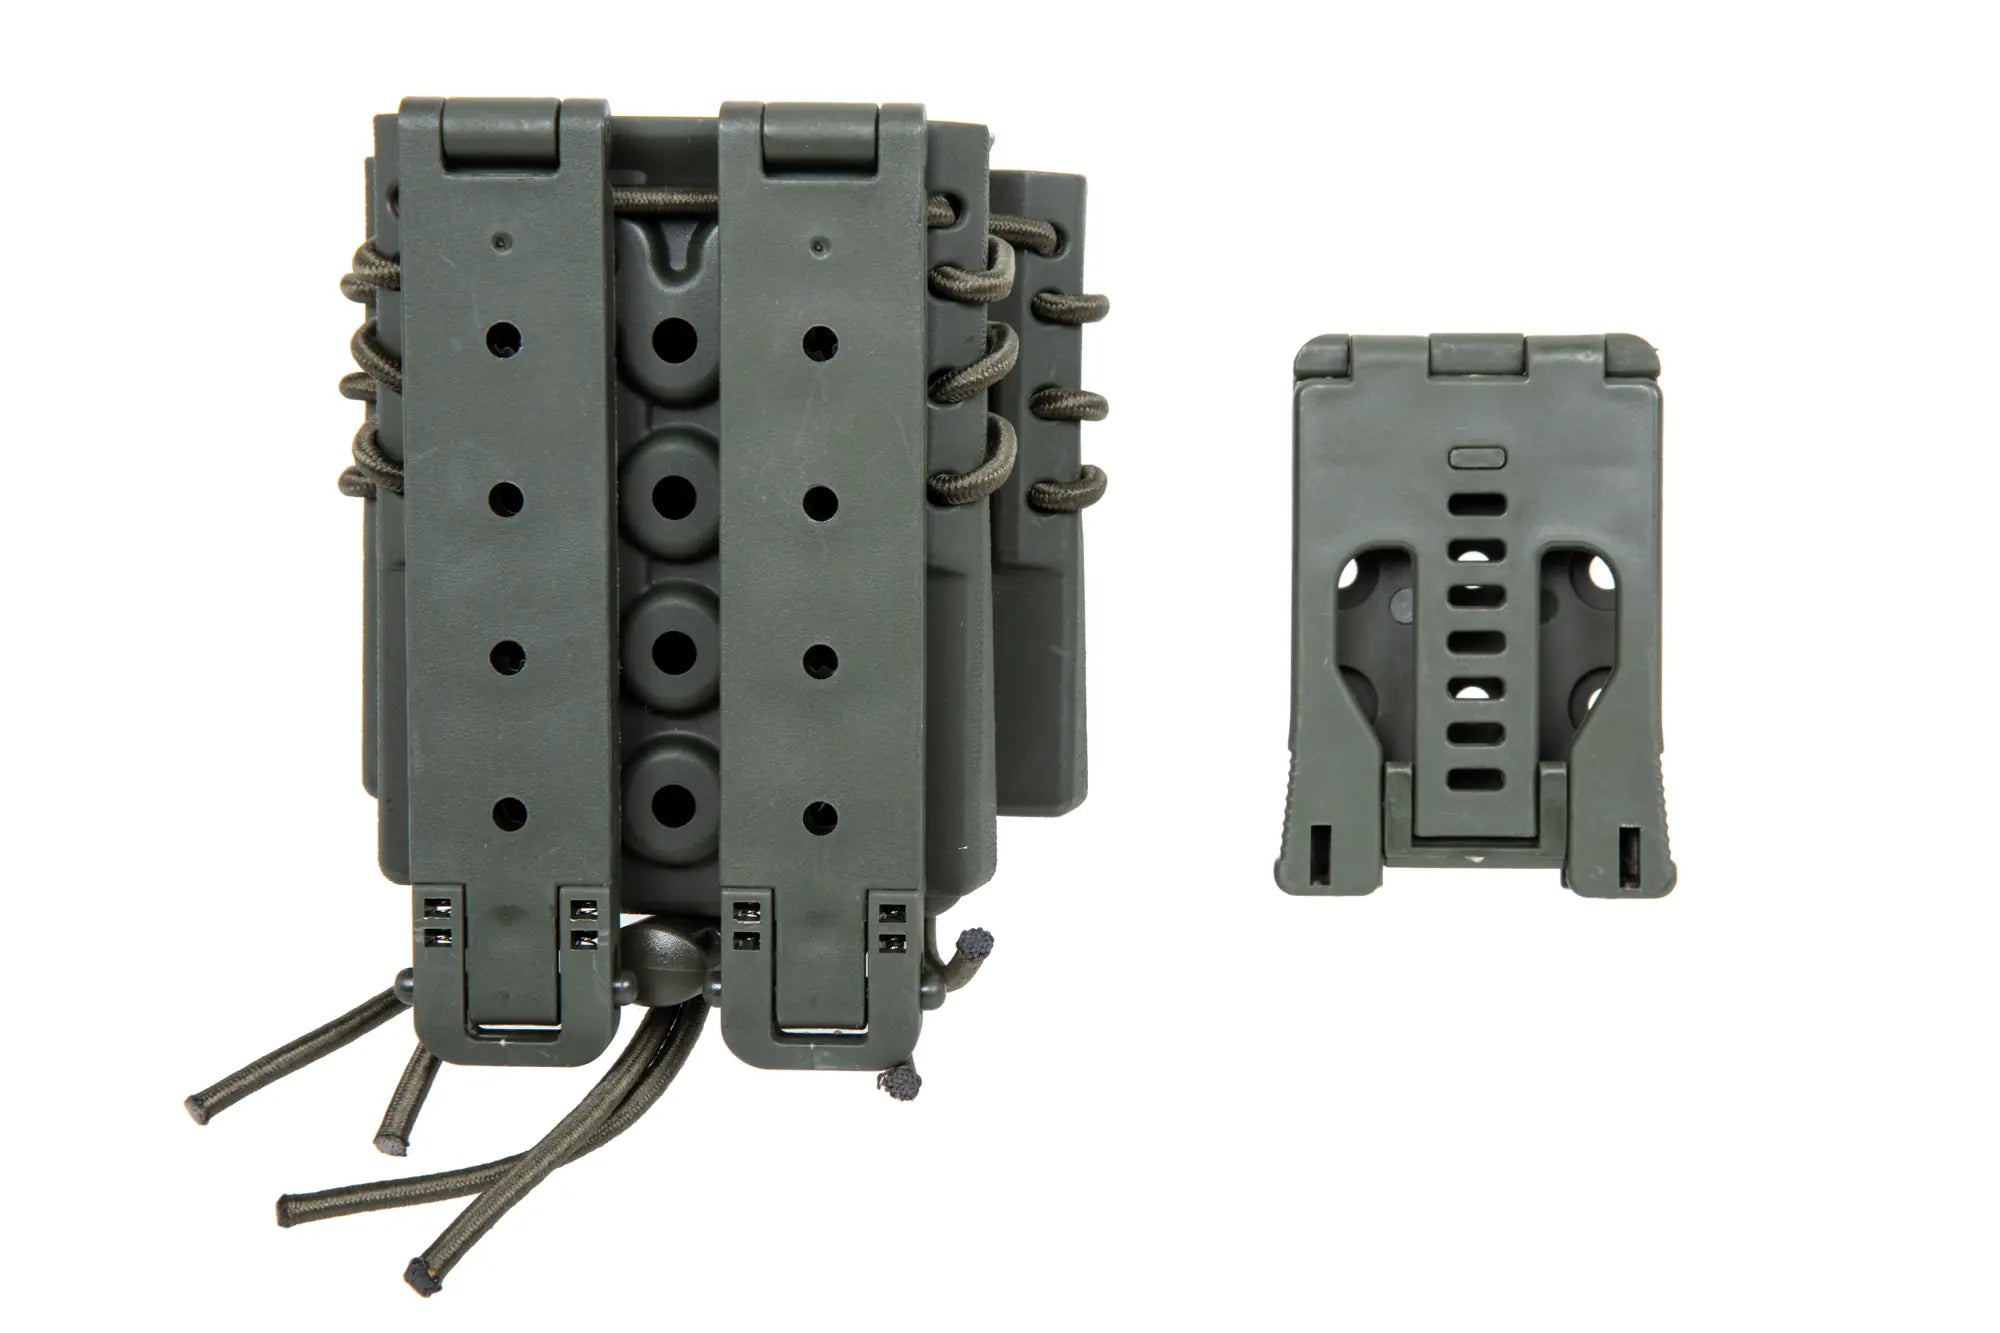 Carrier for 2 9mm magazines and an M4/M16 magazine Wosport Urban Assault Quick Pull Olive